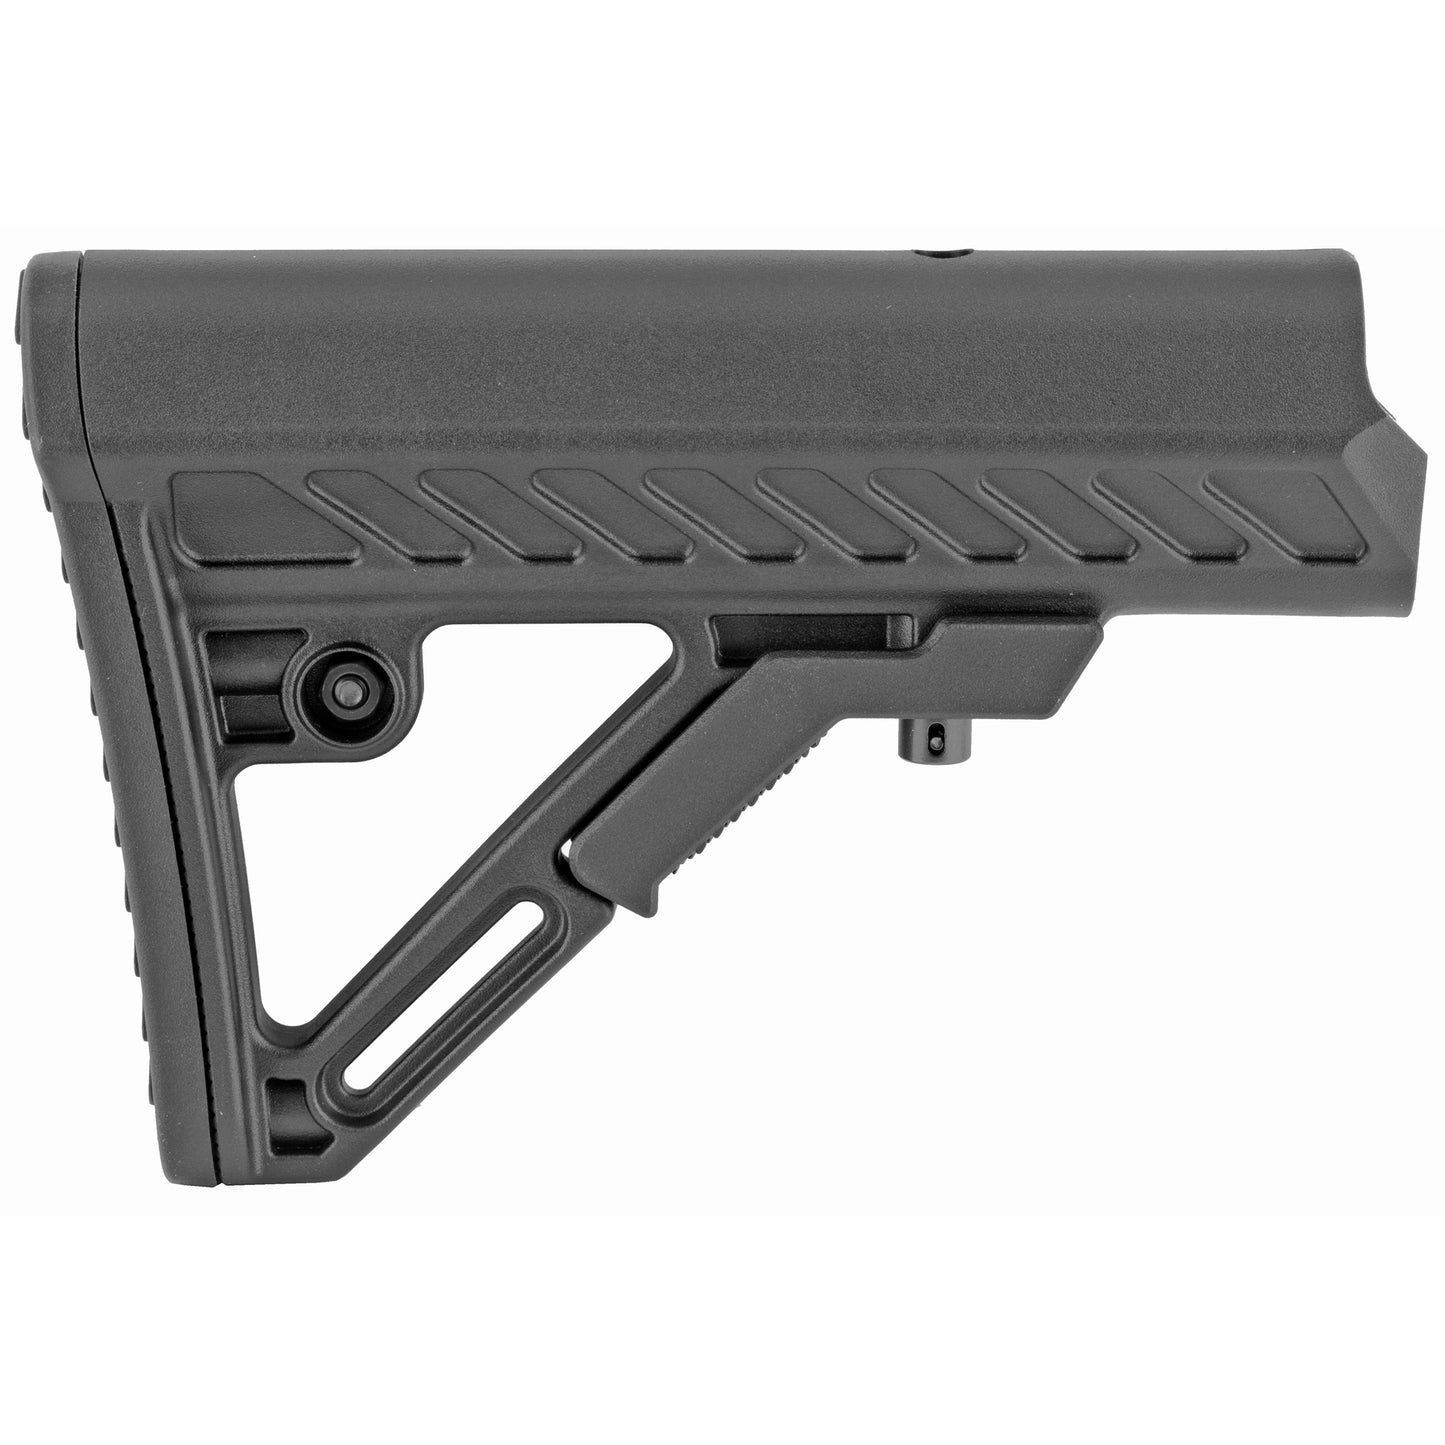 Leapers Inc UTG Model 4 Combat Ops S2 Polymer Stock Black RBUS2BMS - California Shooting Supplies